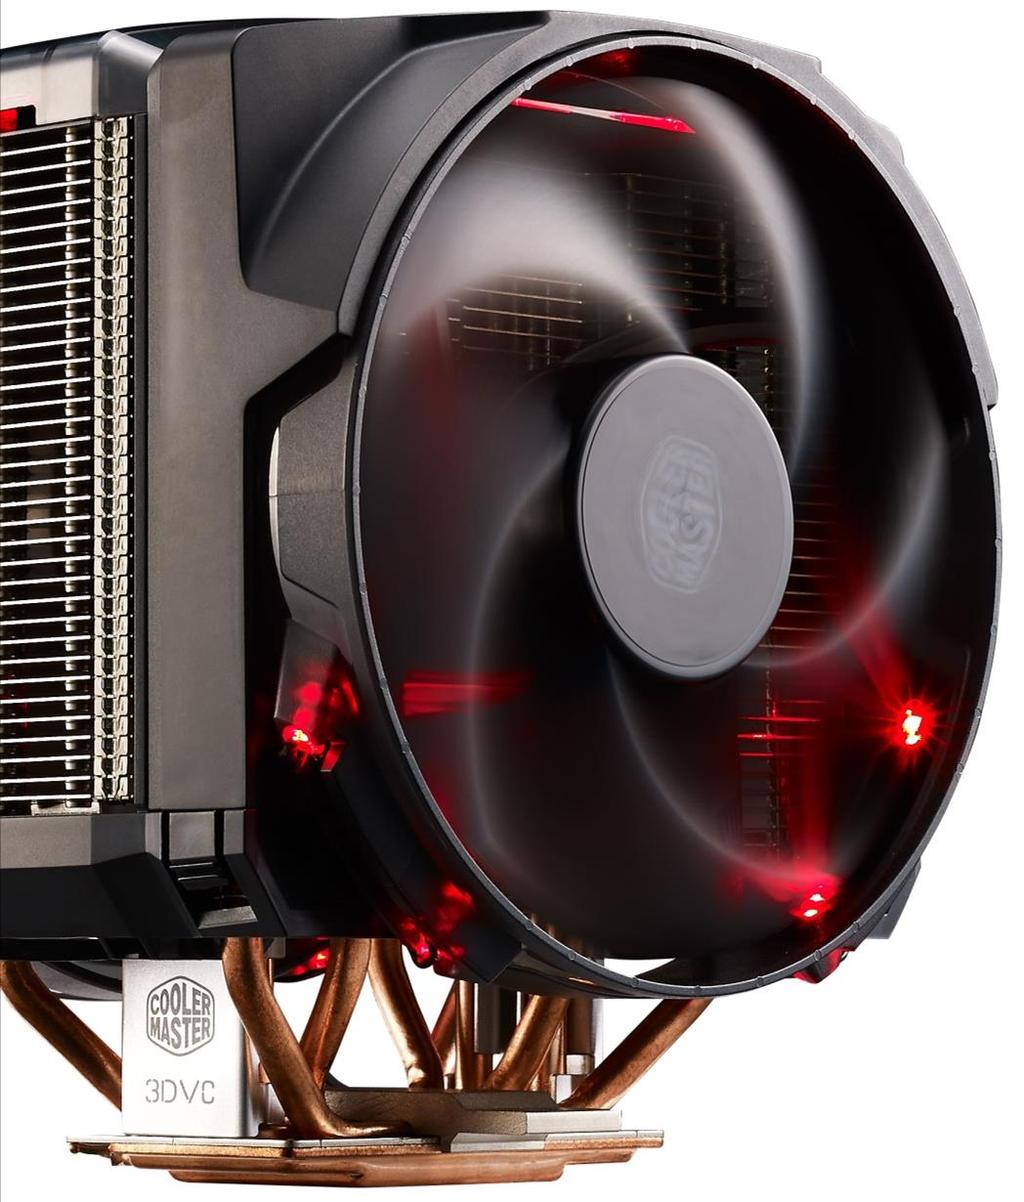 Introducing the MasterAir Maker 8 The MasterAir Maker 8 is designed for gamers and overclockers who demand ultra-low temperatures, aggressive LED lighting, and total customization over their hardware.